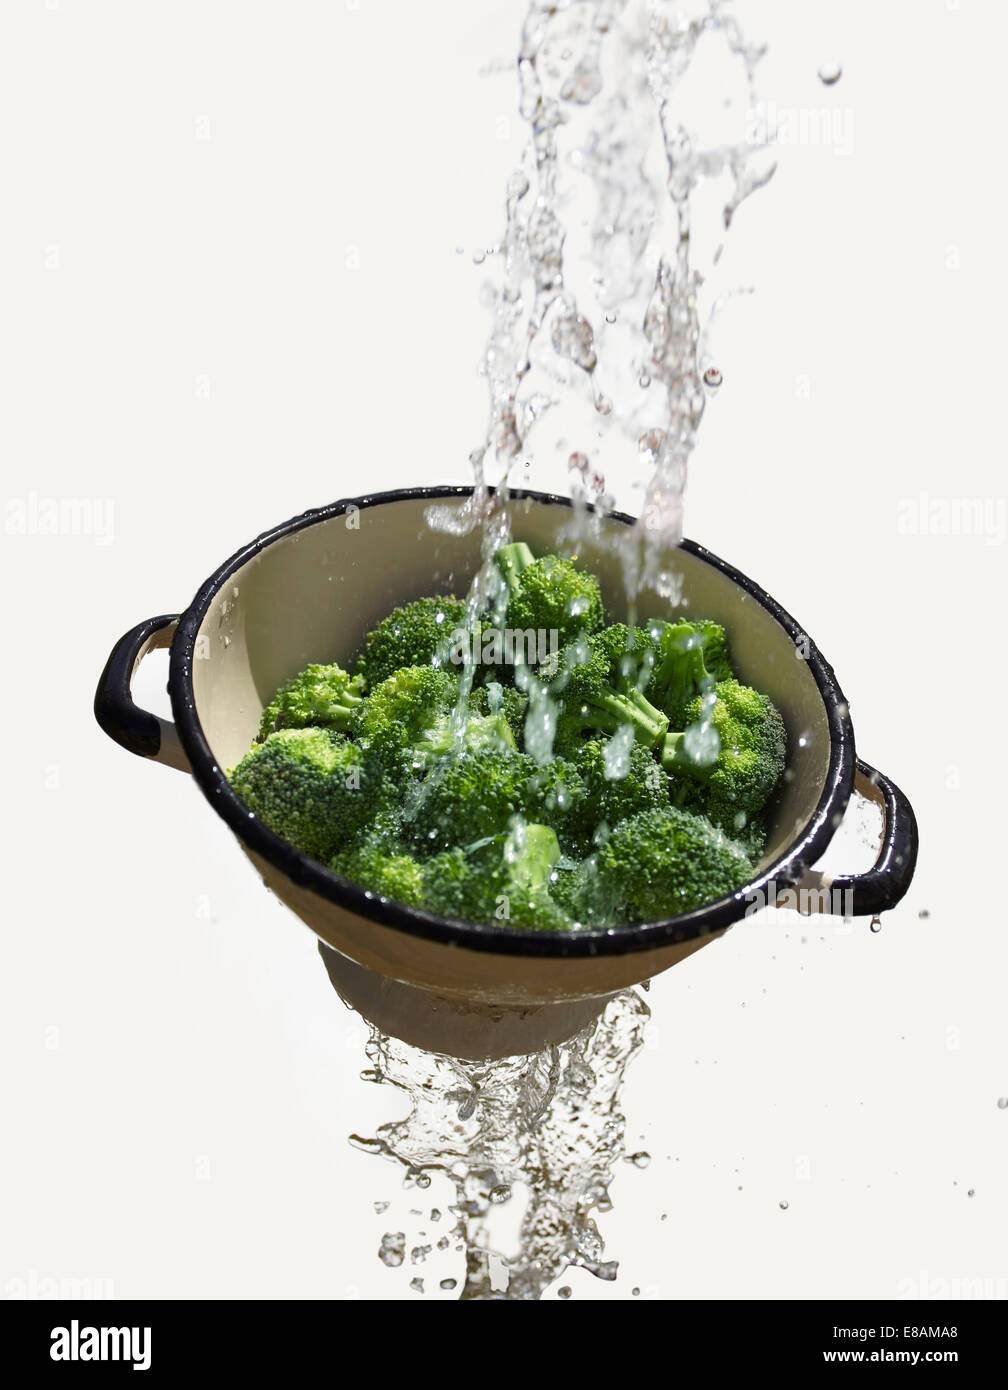 Water falling through colander with fresh broccoli Stock Photo